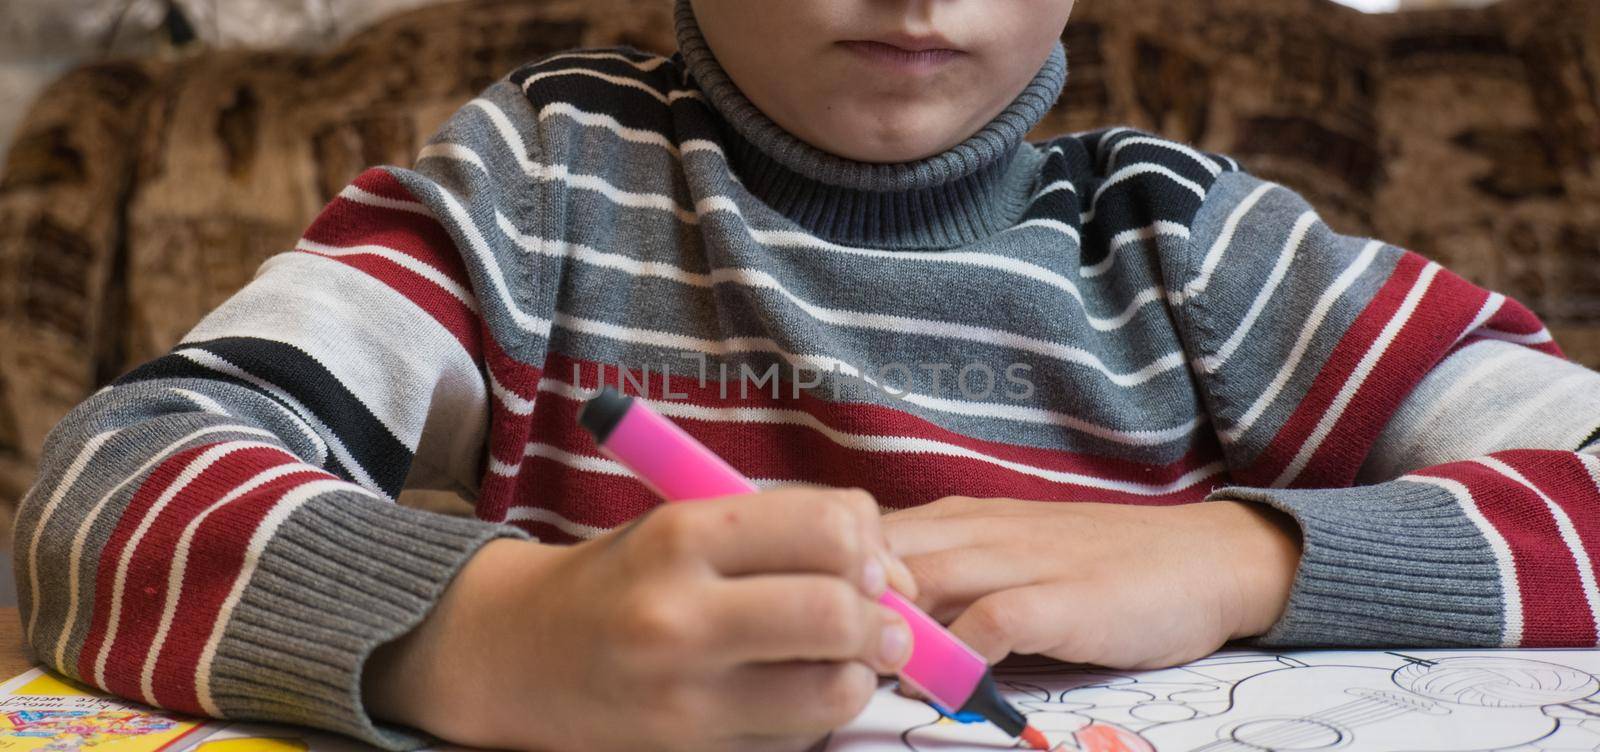 A little boy paints a coloring with crayons and felt-tip pens on a wooden table at home by Ekaterina34